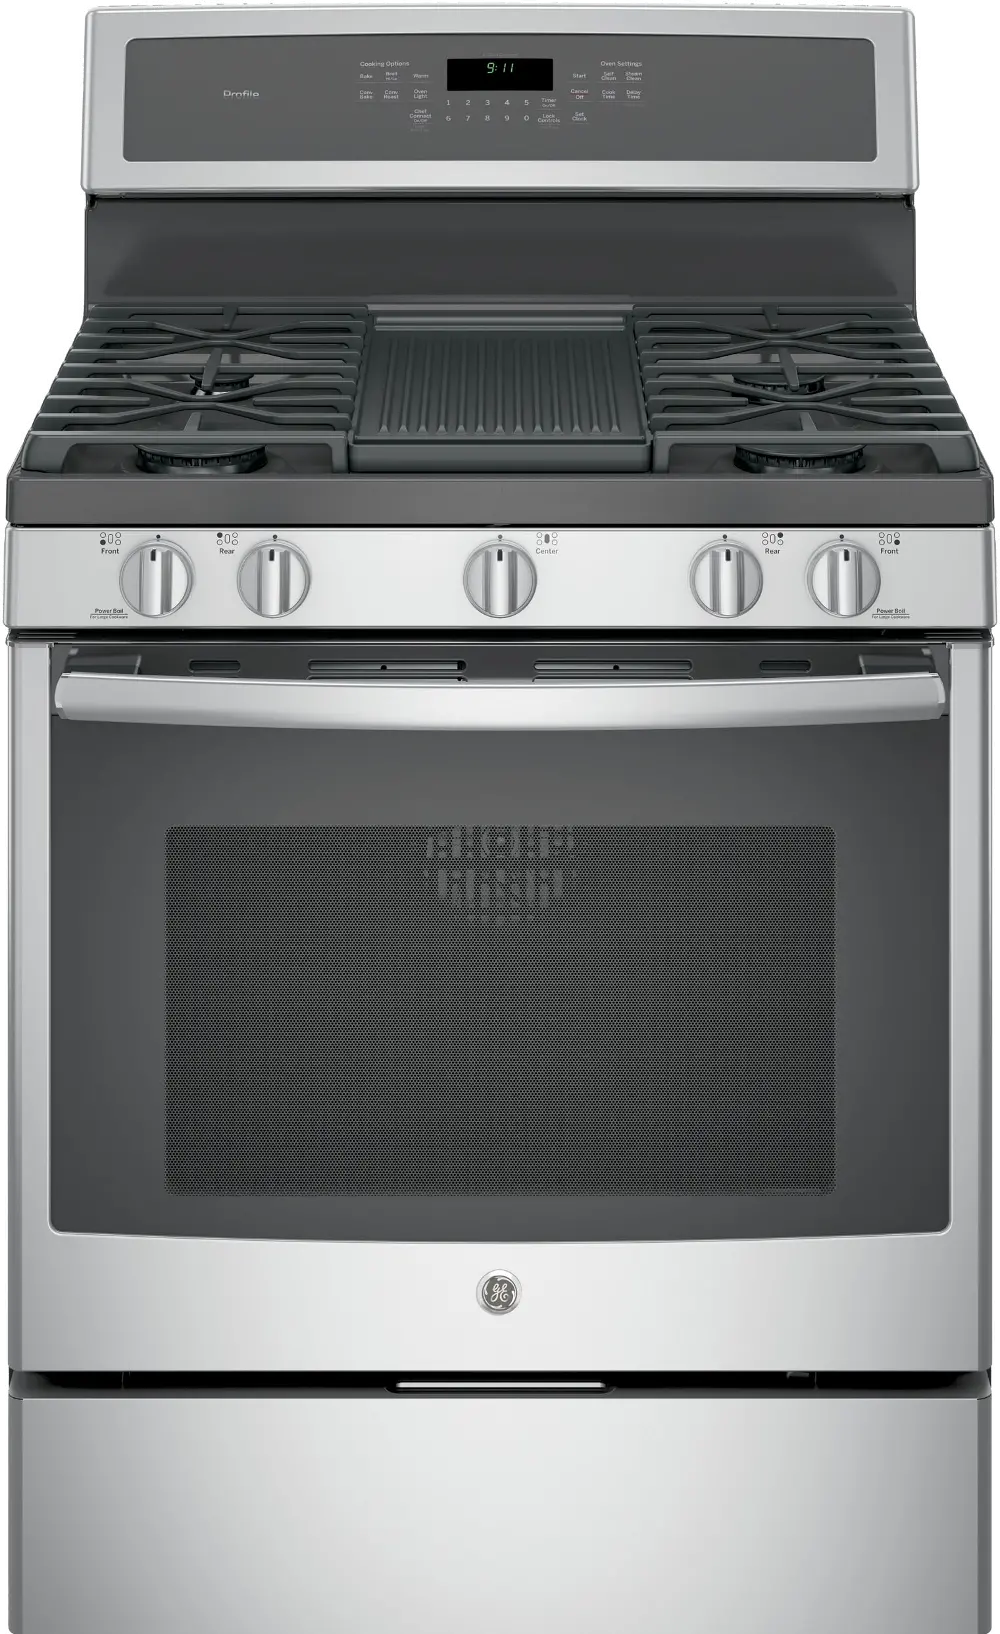 PGB911BEJTS GE Profile Series 5.6 cu. ft. Free-Standing Gas Convection Range - Stainless Steel-1